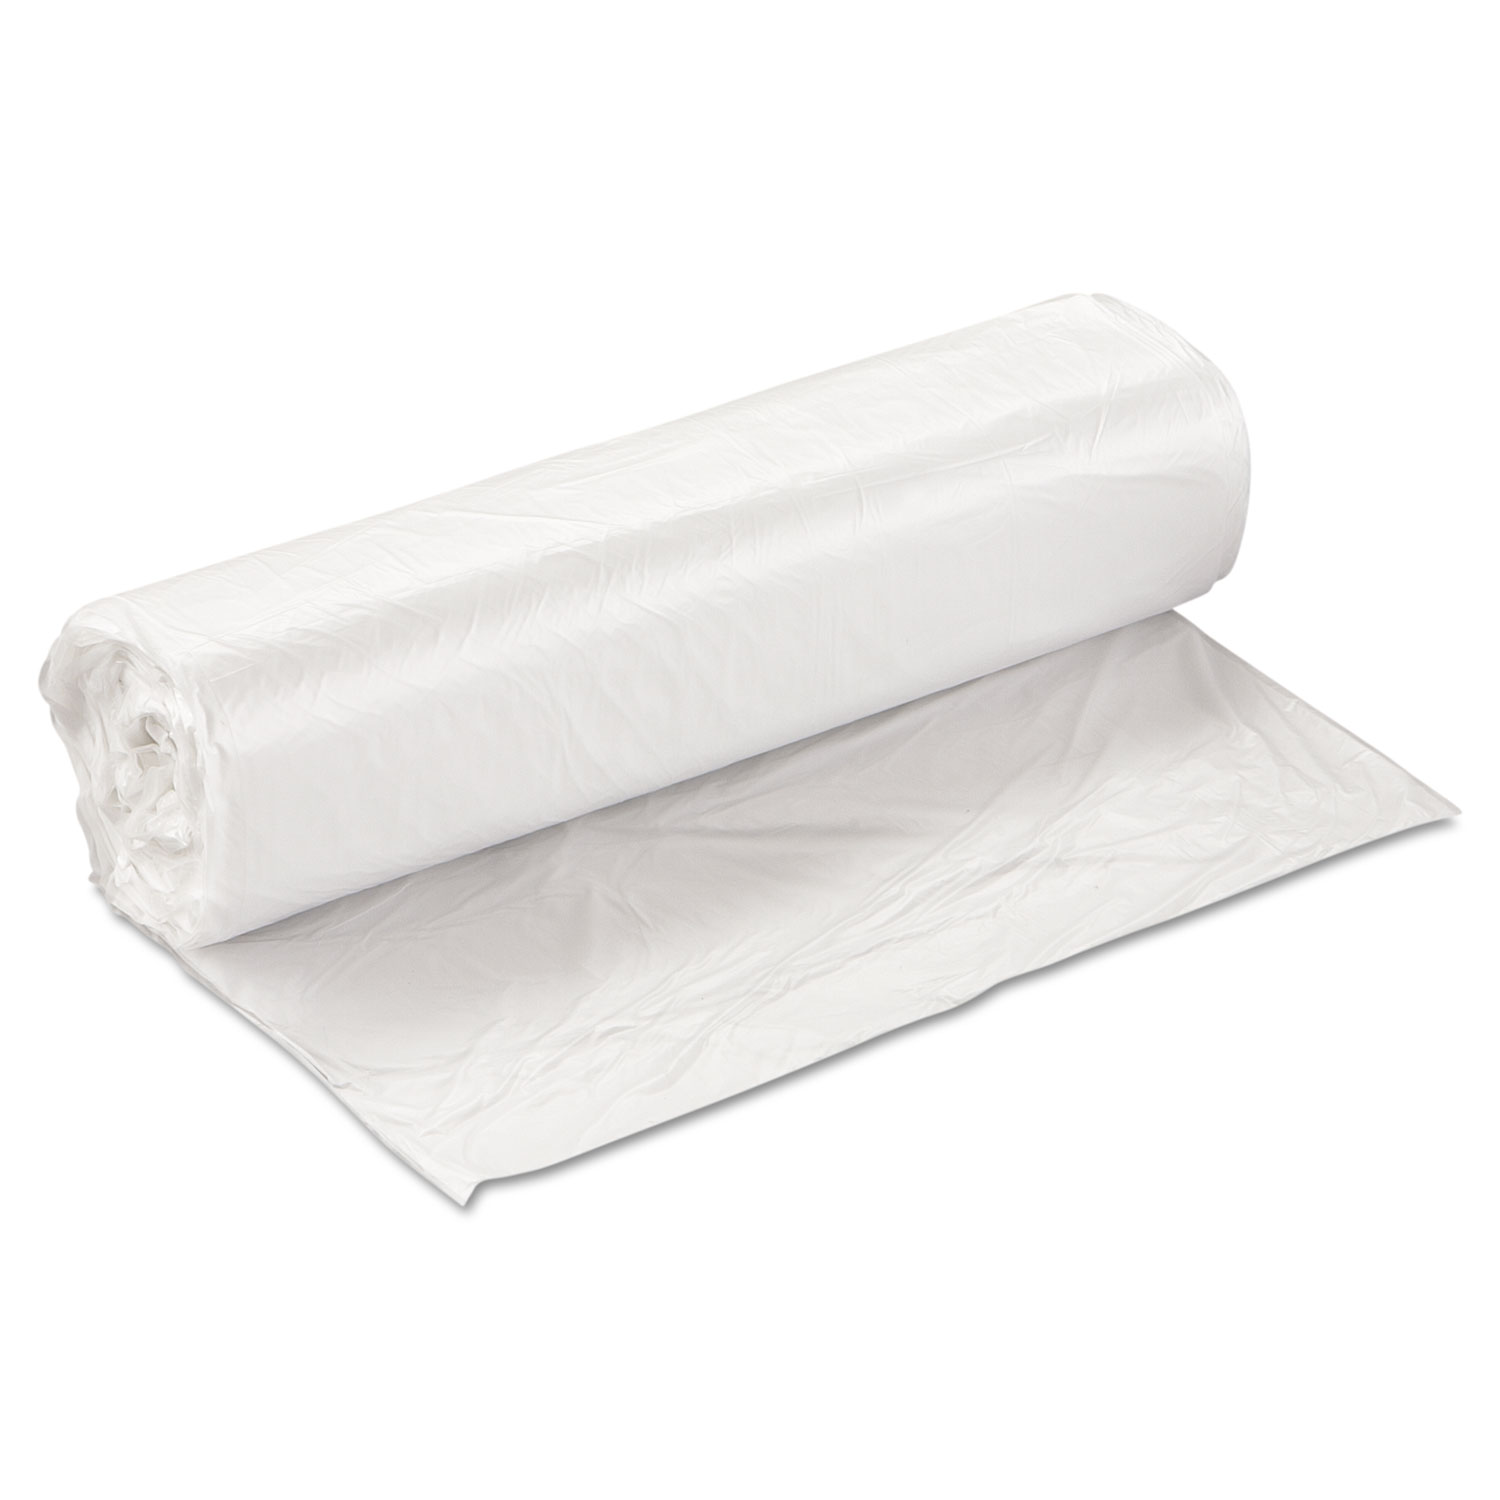  Inteplast Group VALH3037N10 High-Density Commercial Can Liners Value Pack, 30 gal, 9 microns, 30 x 36, Natural, 500/Carton (IBSVALH3037N10) 